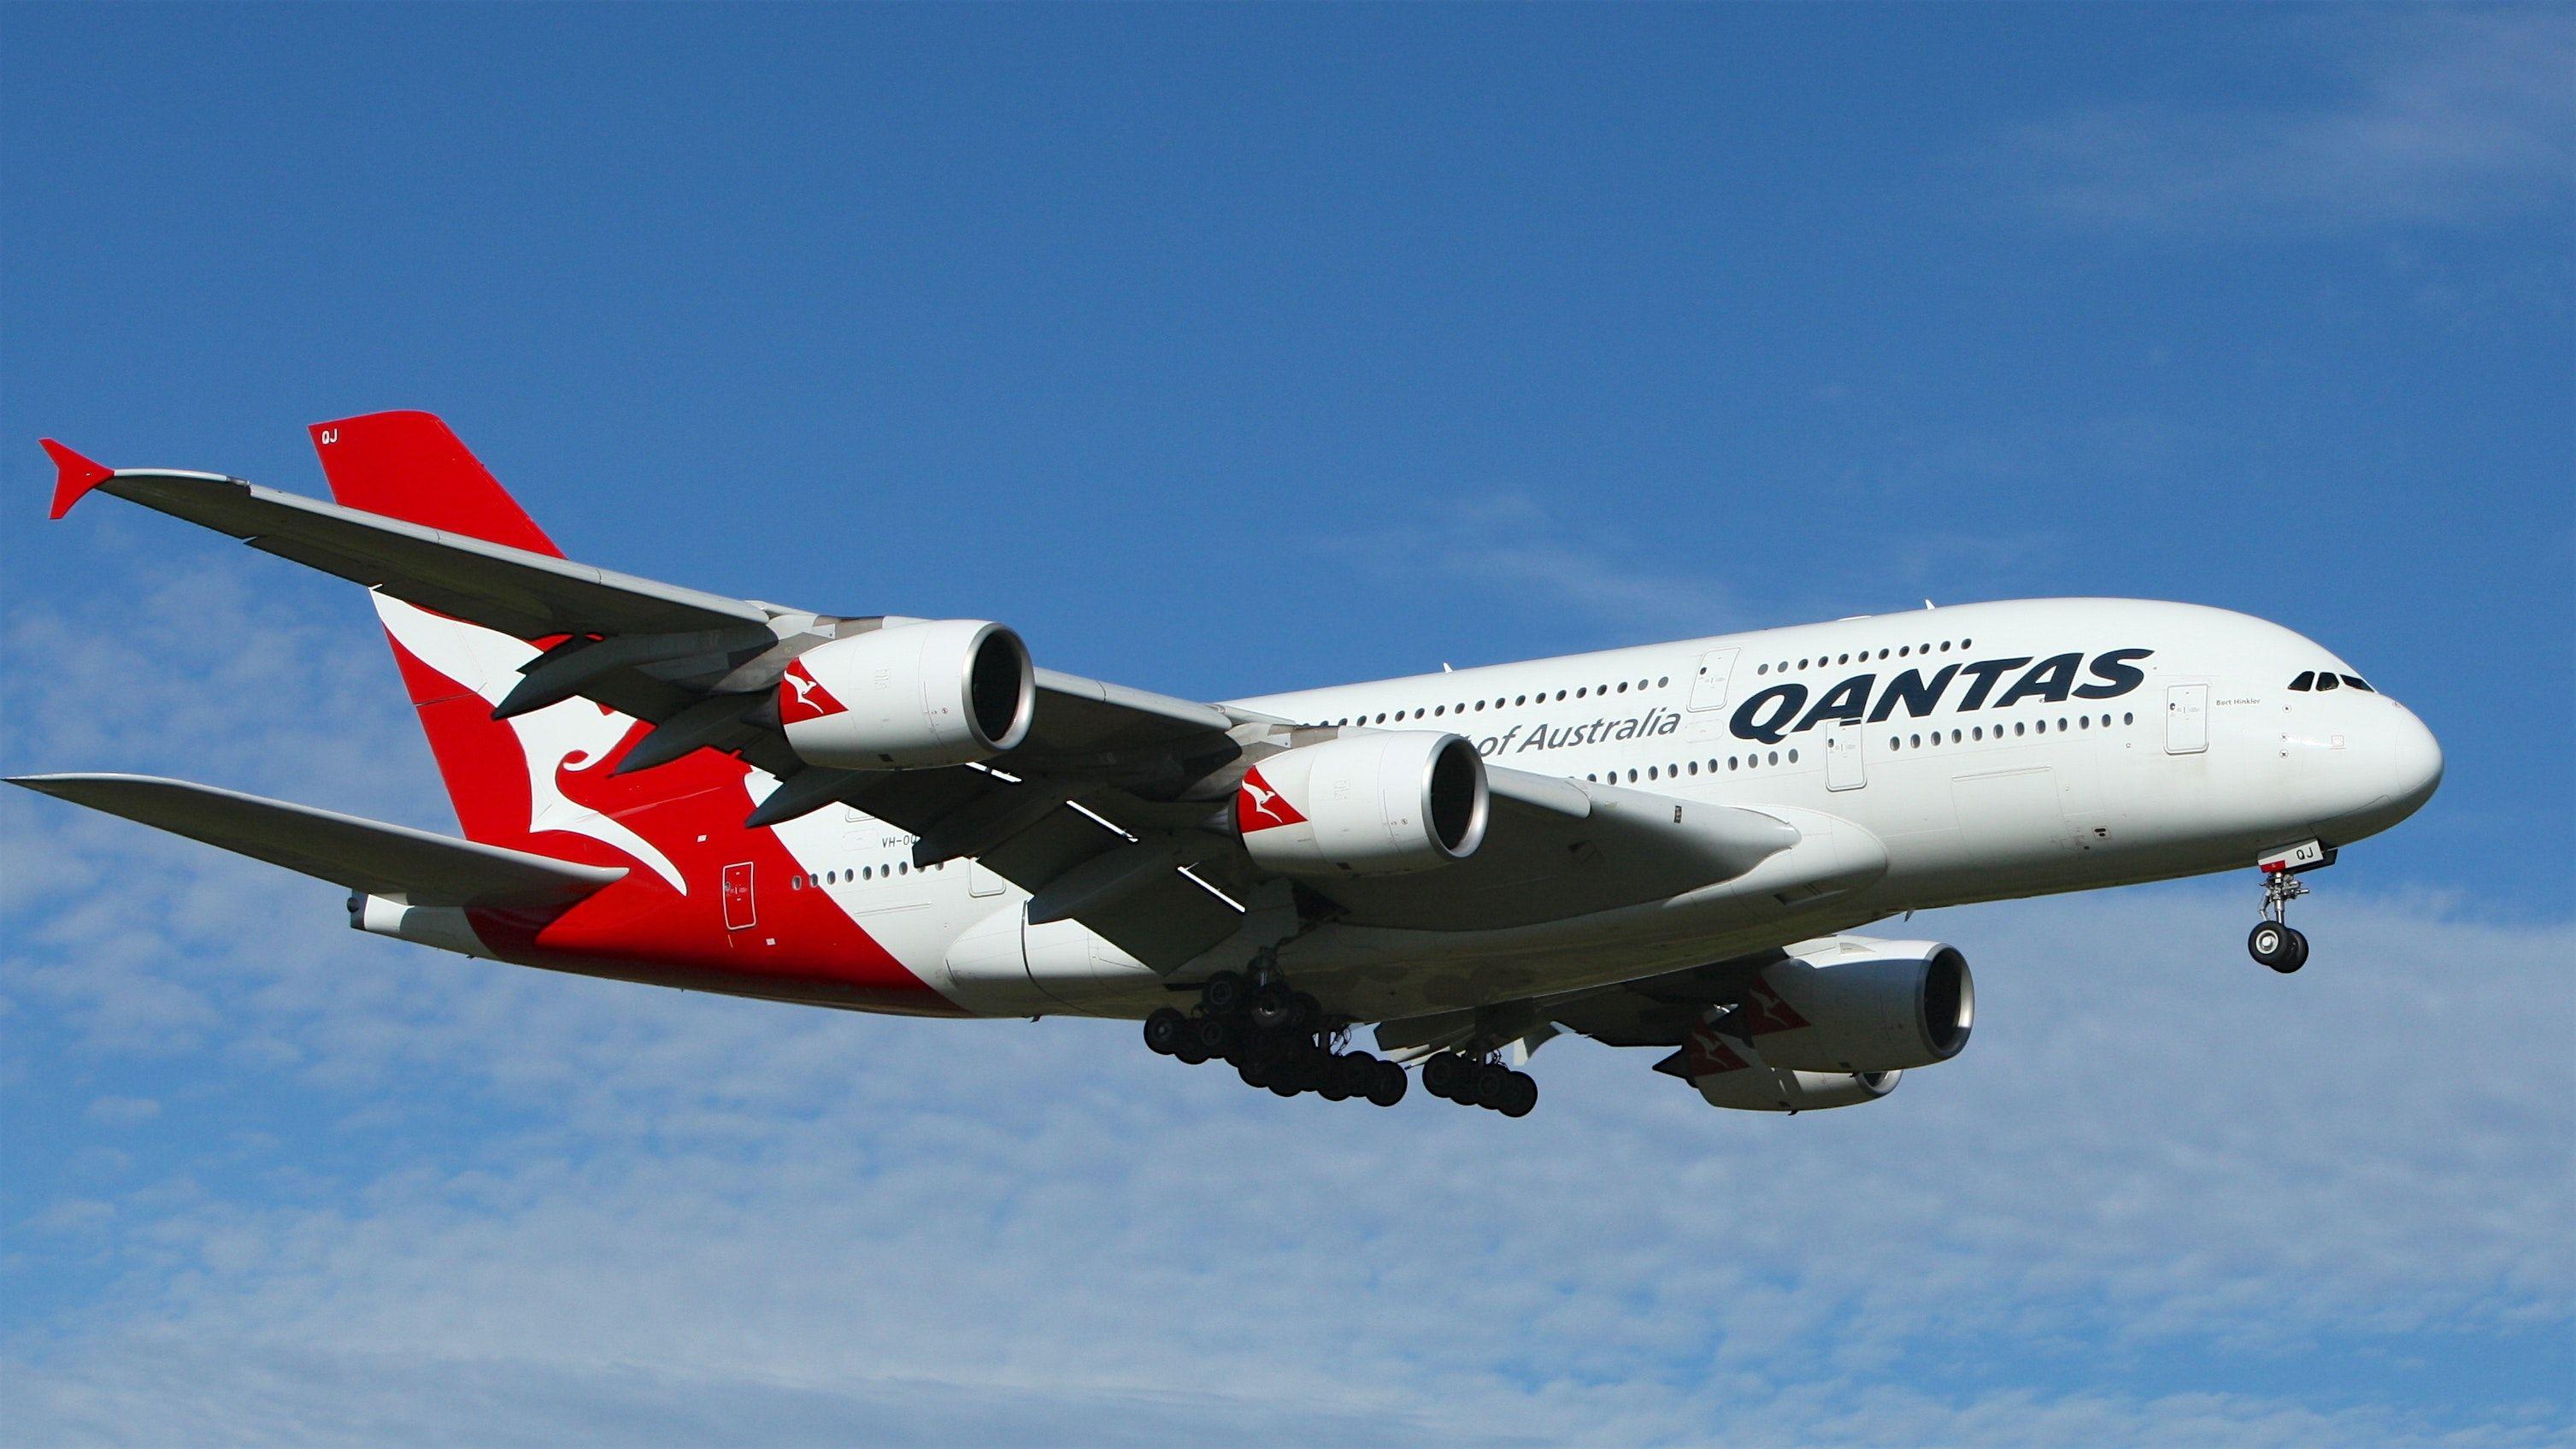 White and Red Airline Logo - White and Red Qantas Airplane Fly High Under Blue and White Clouds